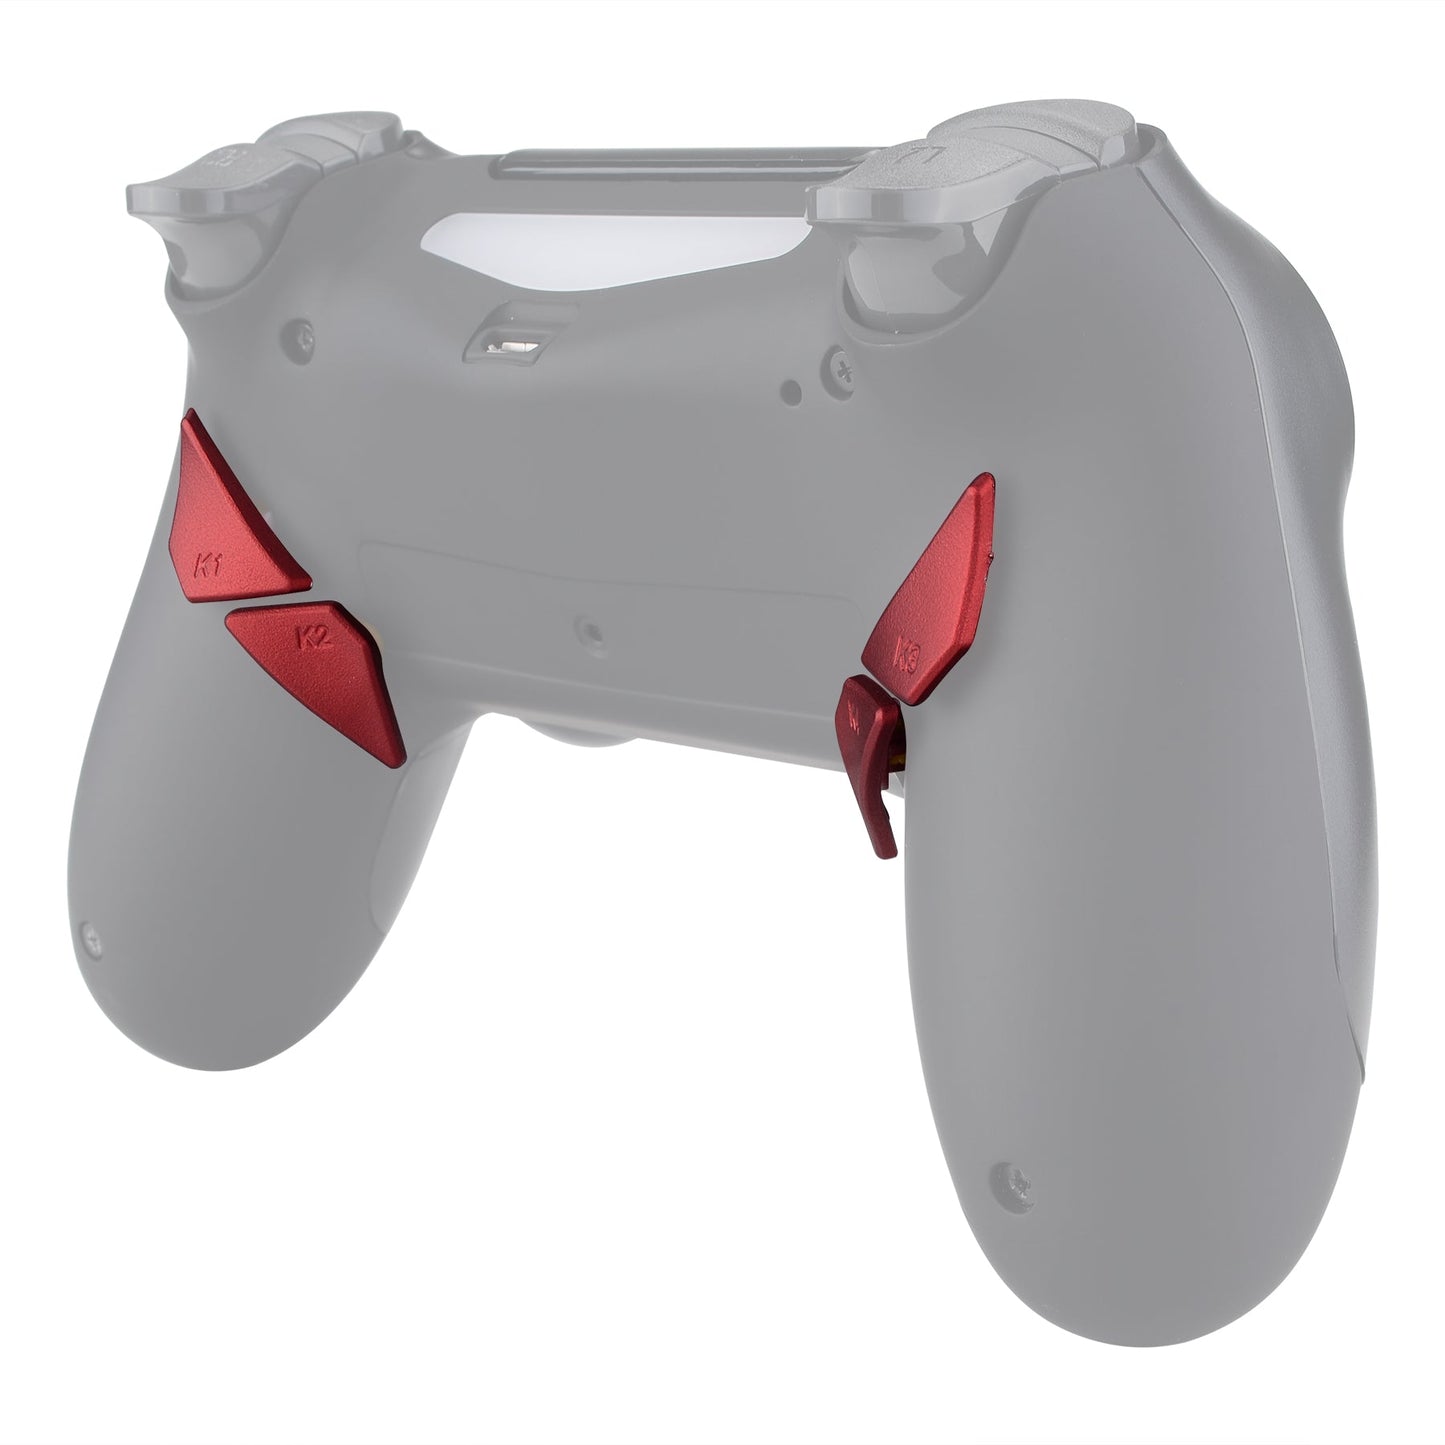 eXtremeRate Retail Soft Touch Scarlet Red Replacement Redesigned Back Buttons K1 K2 K3 K4 Paddles for eXtremeRate ps4 Controller Dawn Remap Kit - P4GZ024